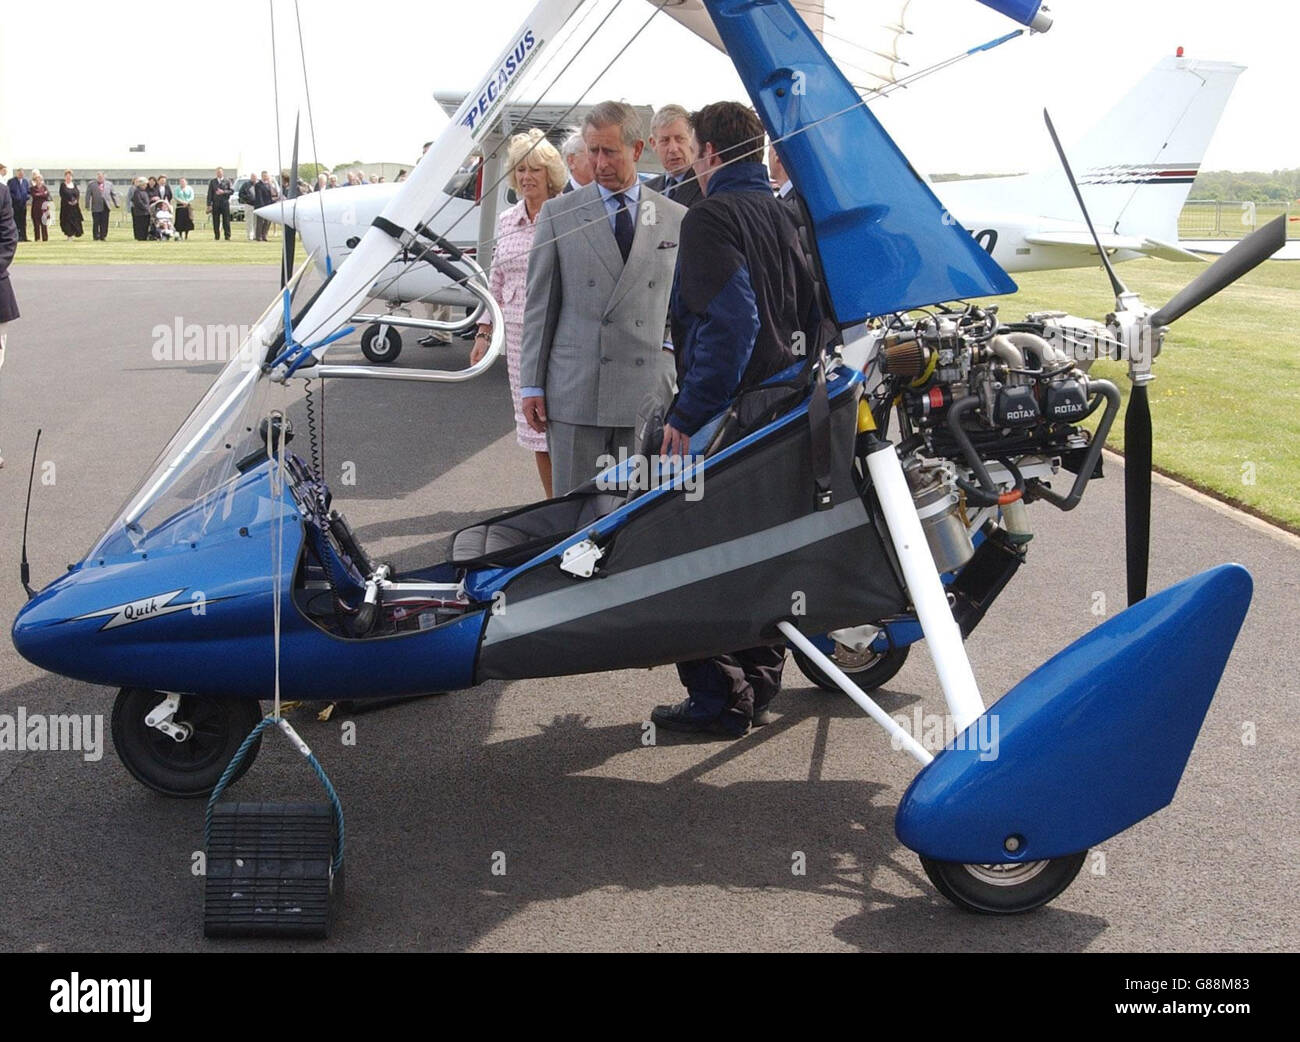 The Prince of Wales takes a close look at a microlight aircraft whilst talking with Chris Bailey, 25, Chief Flying Instructor of microlights at Kemble Flying Club, when he and the Duchess of Cornwall visited Kemble Airfield. A former RAF /UASF base dating back to 1936, it has now made the transition to a busy civilian airfield. Stock Photo